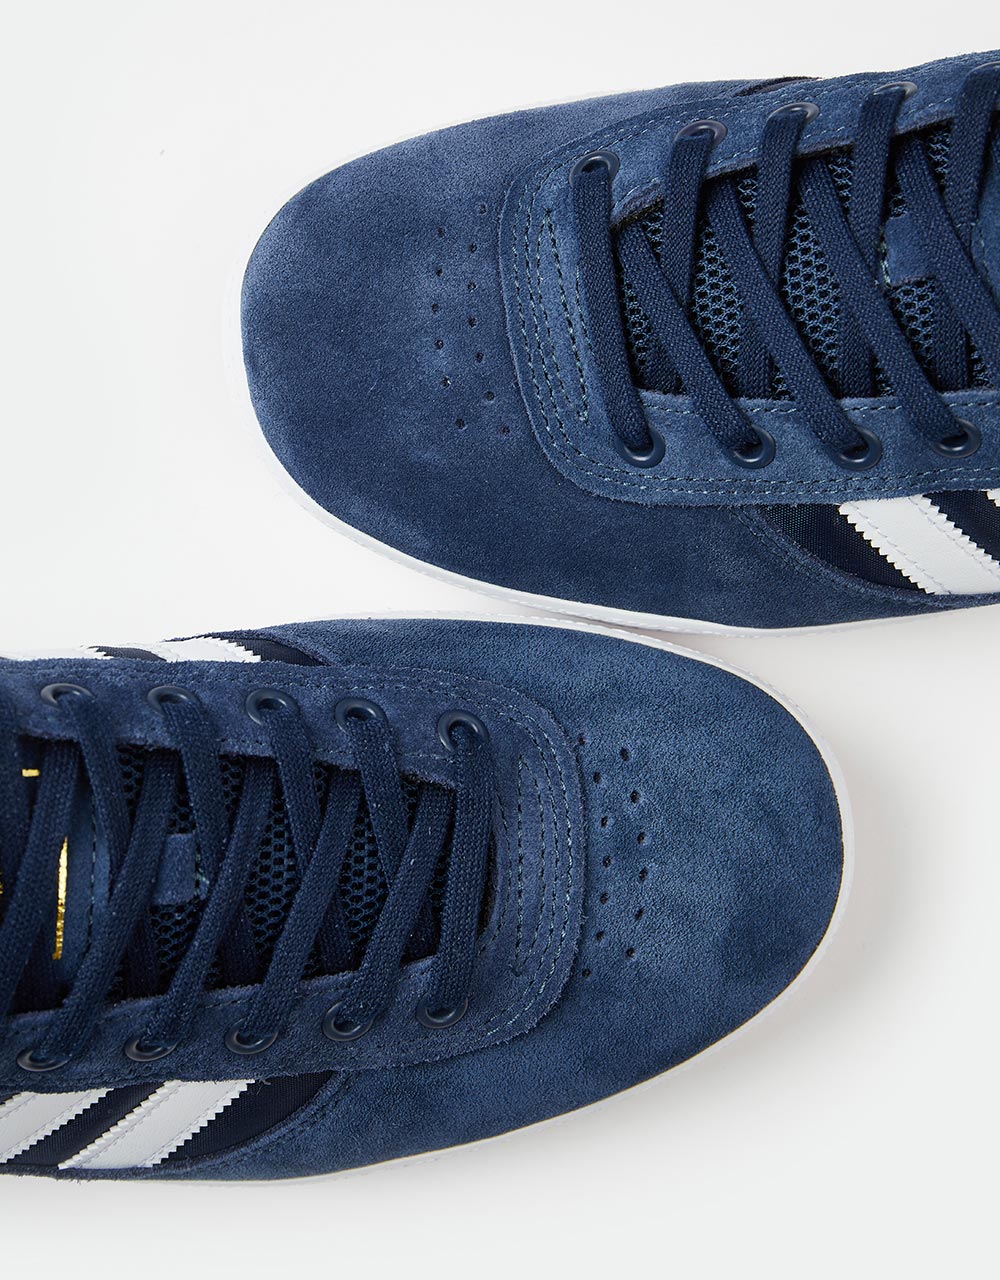 adidas Puig Indoor Skate Shoes - Collegiate Navy/White/Shadow Navy